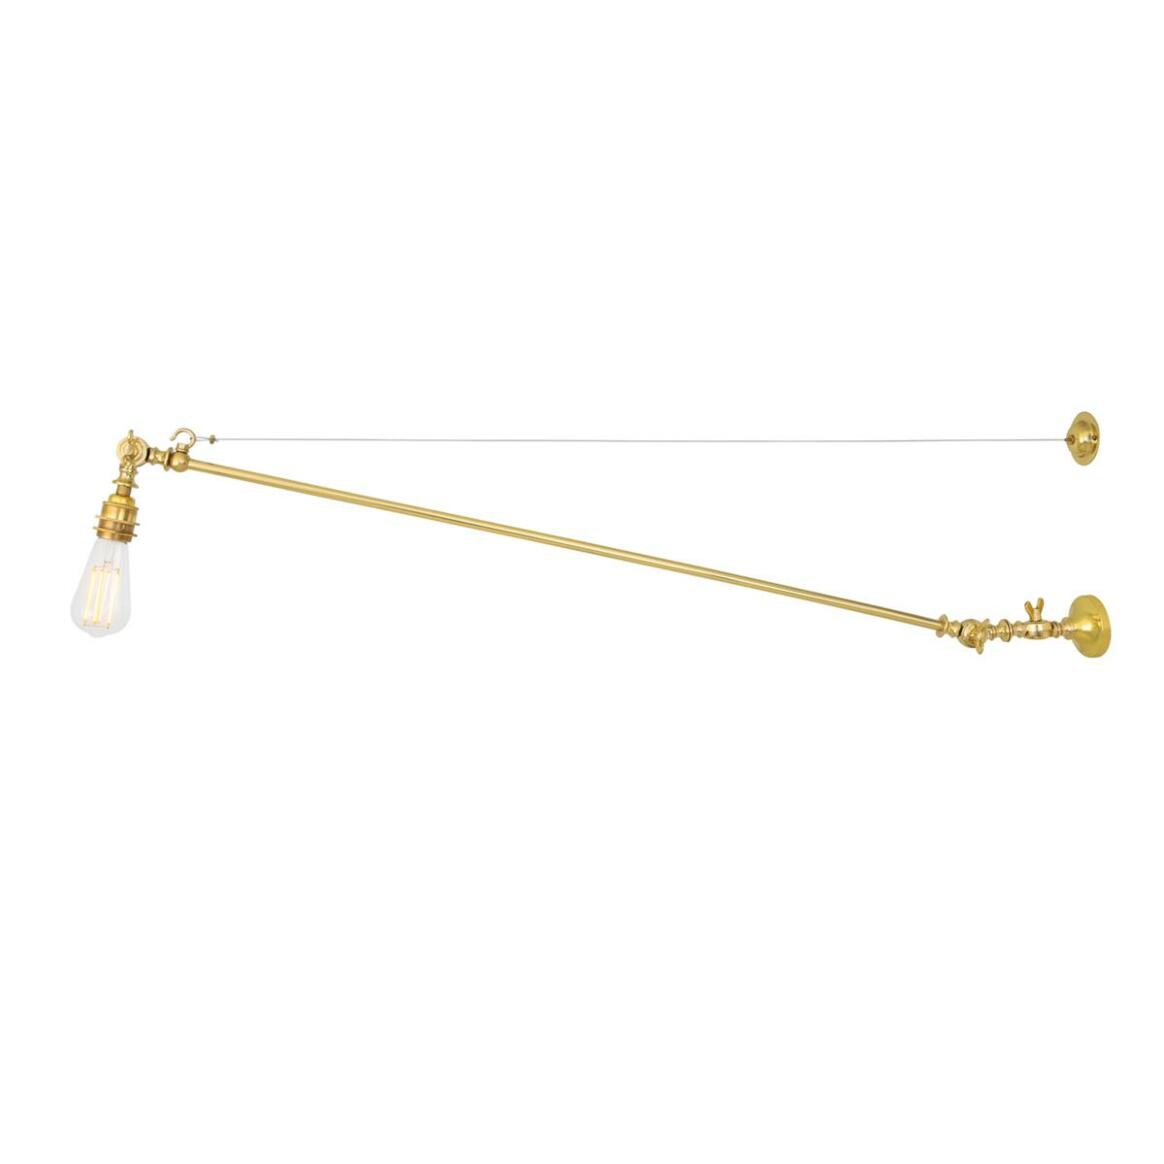 Manick Industrial Swing Arm Adjustable Wall Light main product image